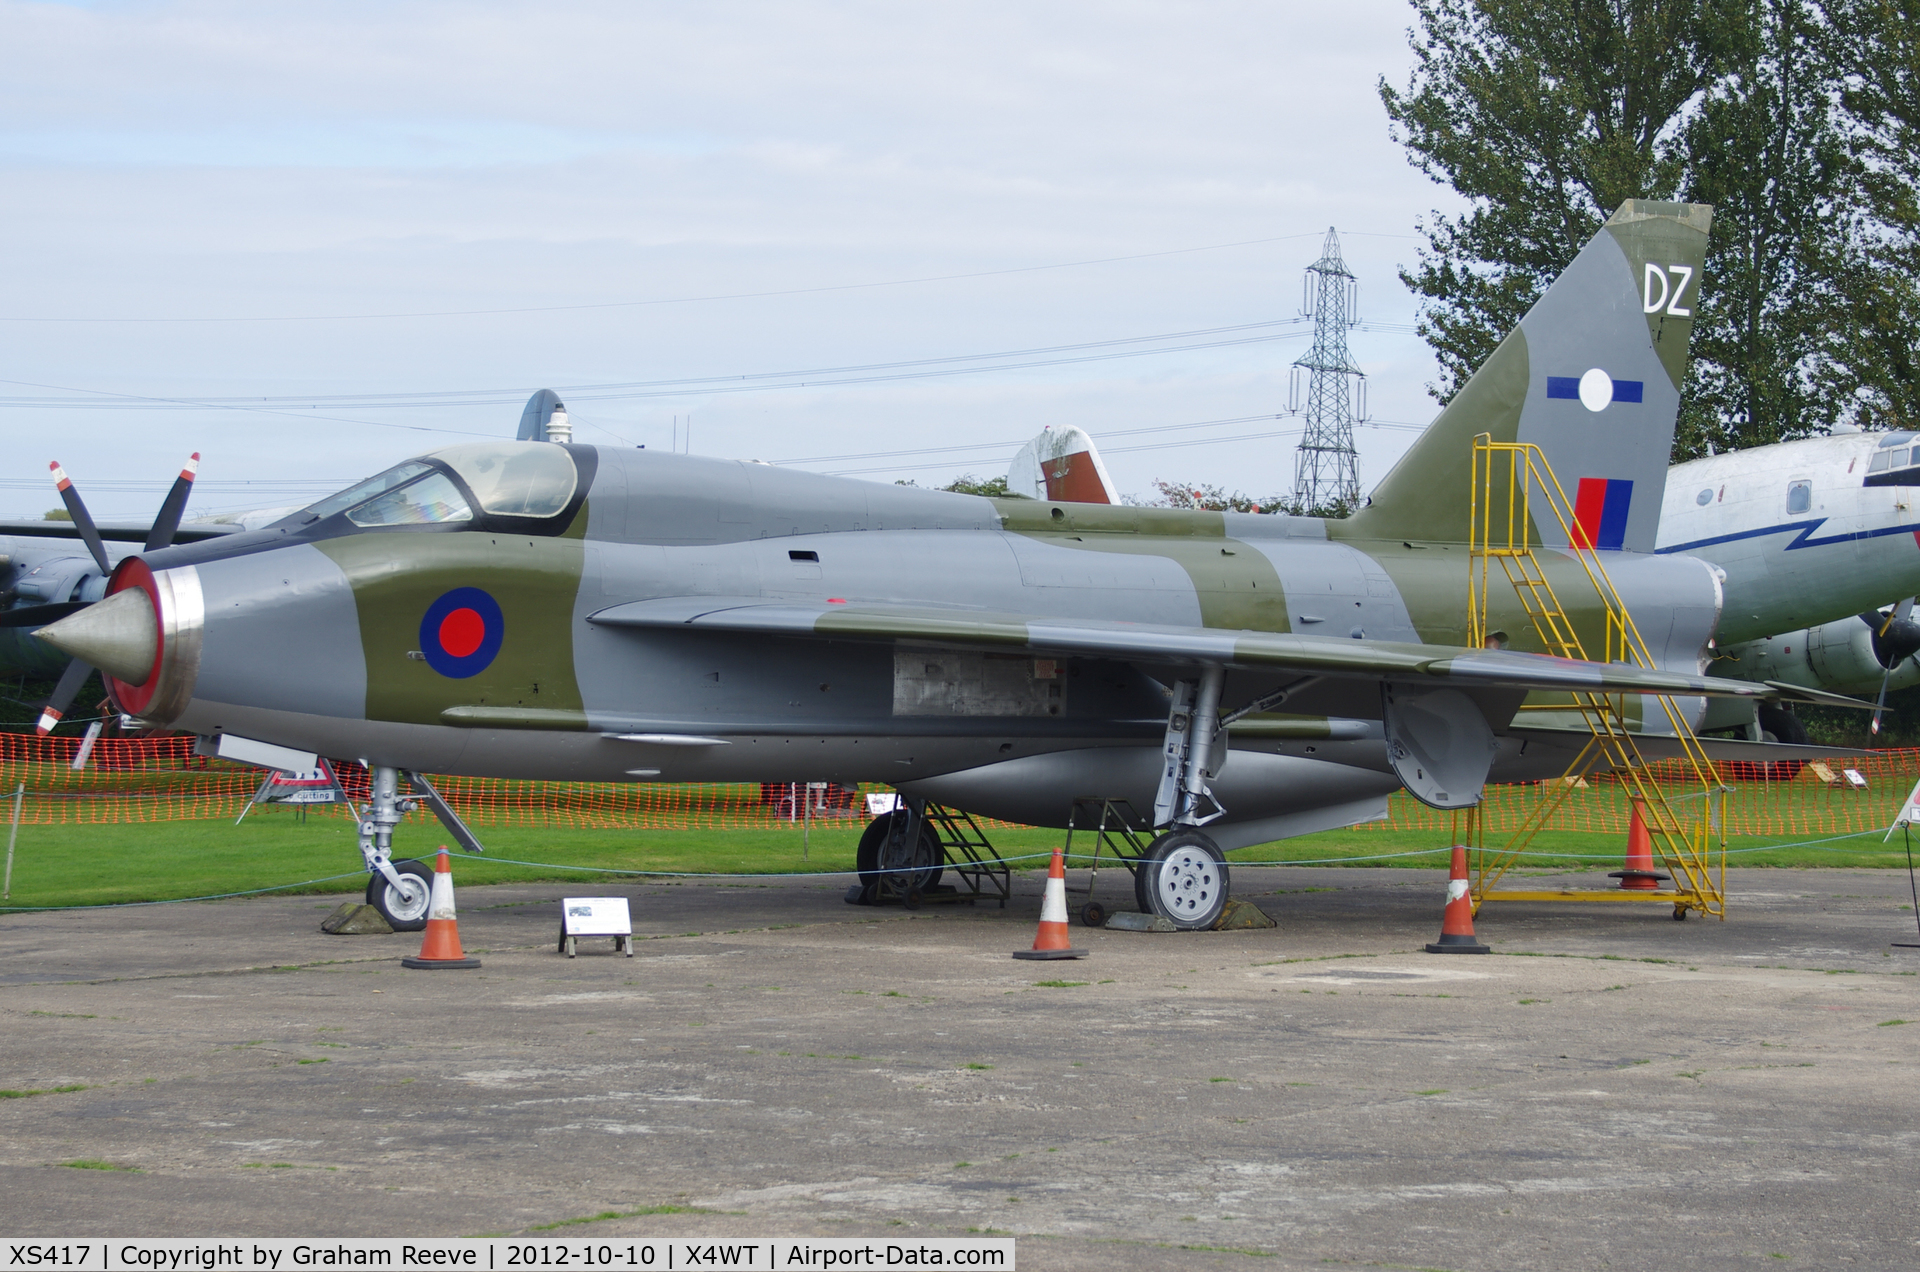 XS417, 1964 English Electric Lightning T.5 C/N 95002, Preserved at the Newark Air Museum.